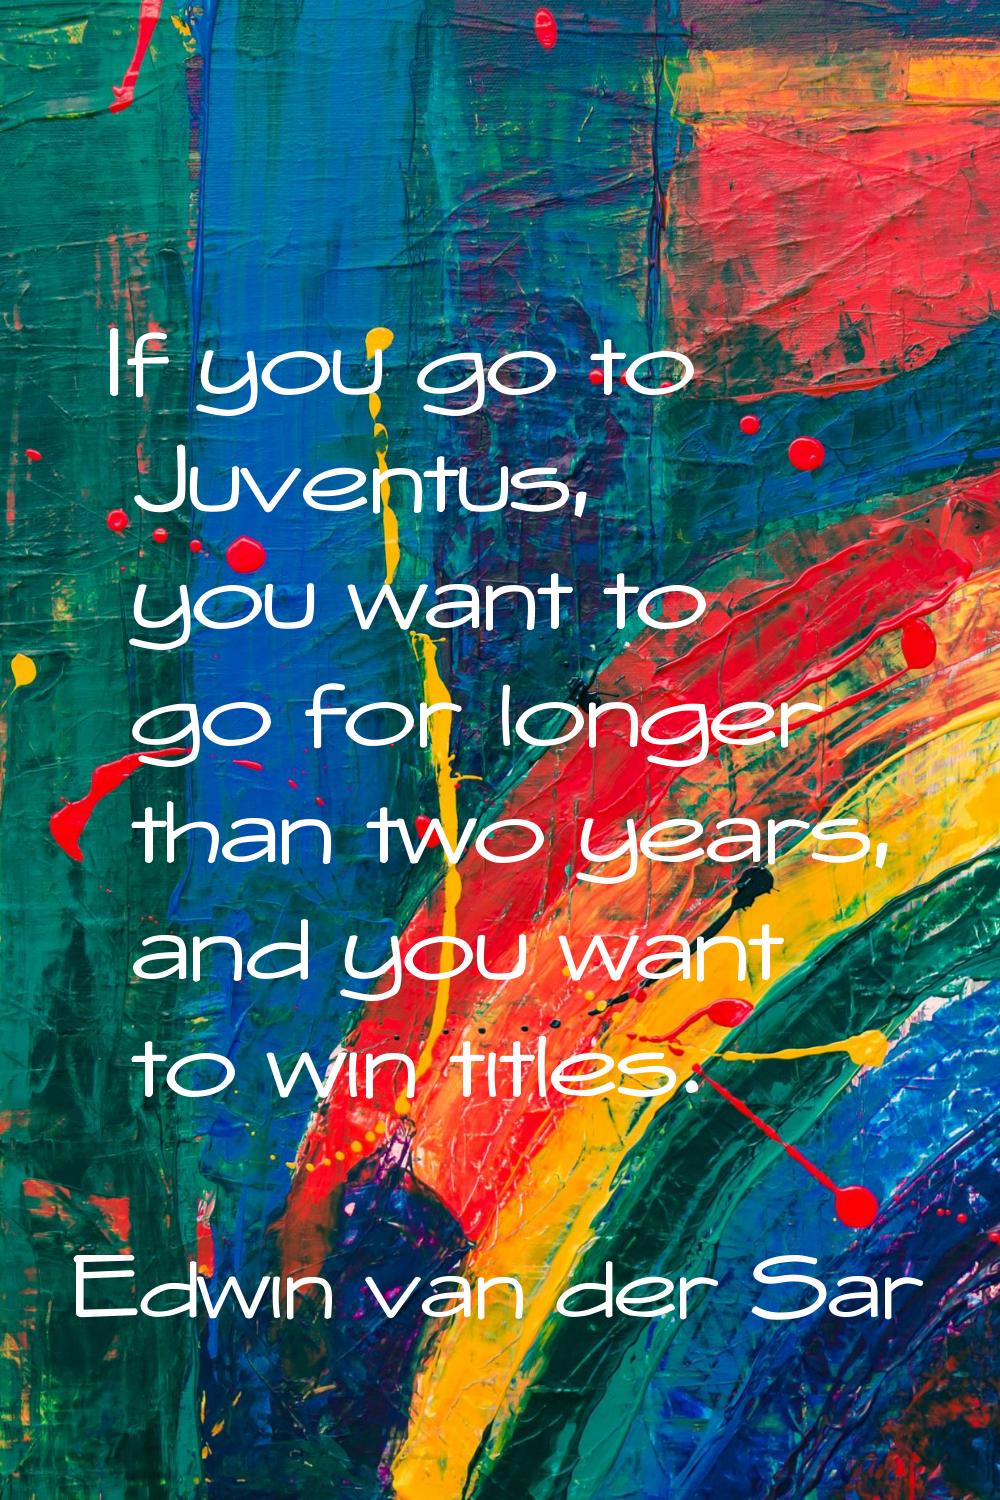 If you go to Juventus, you want to go for longer than two years, and you want to win titles.